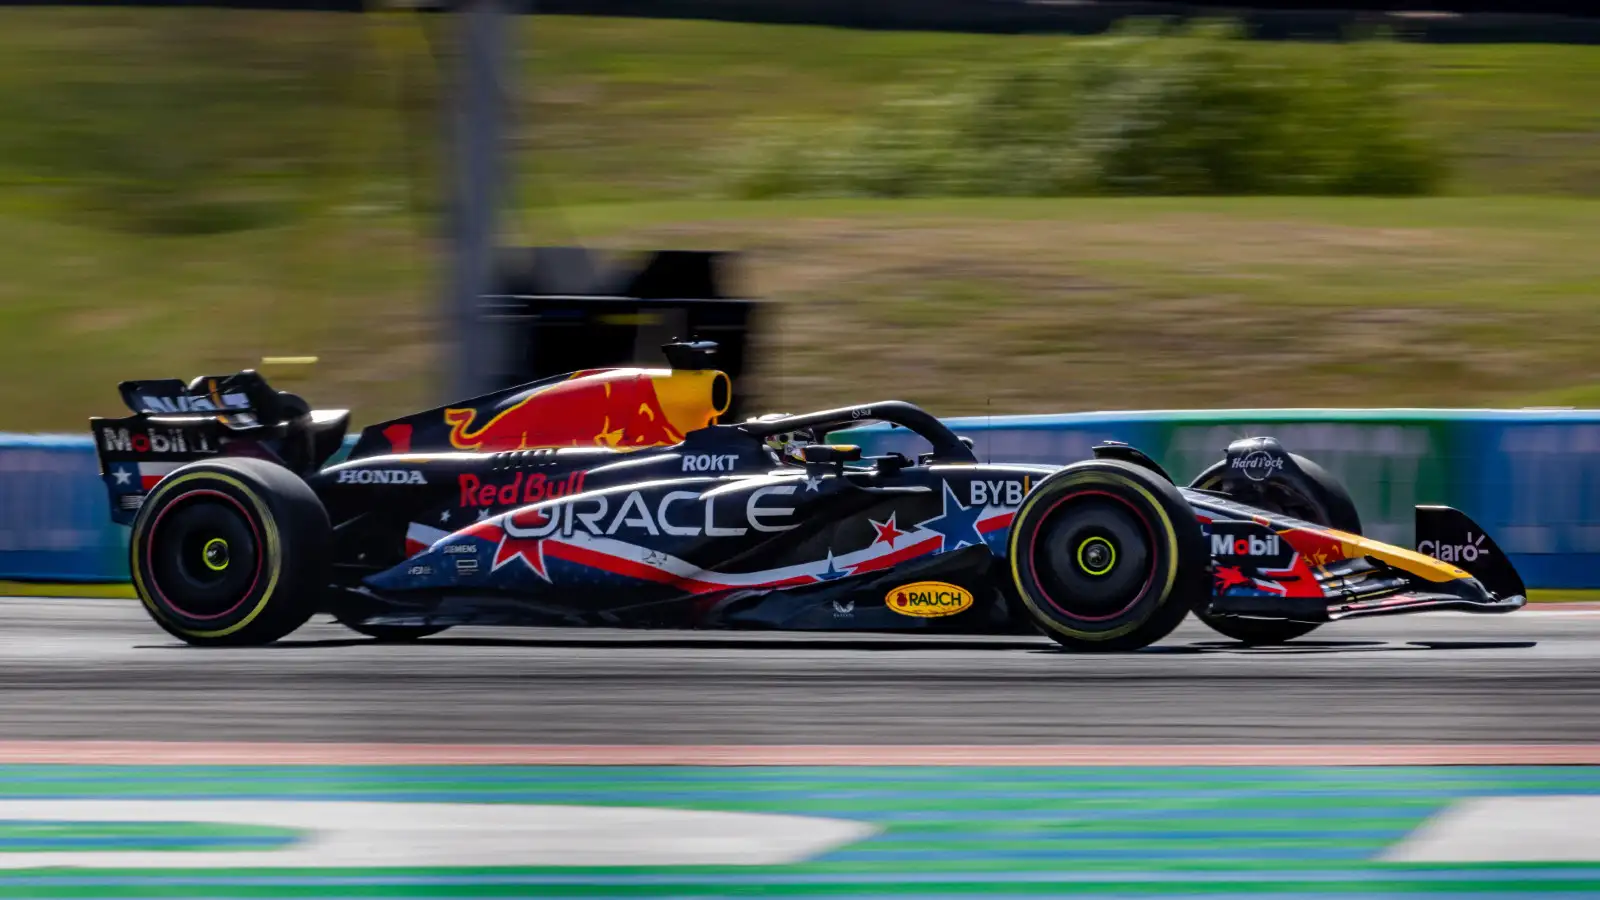 Red Bull's Max Verstappen on track during the United States Grand Prix.